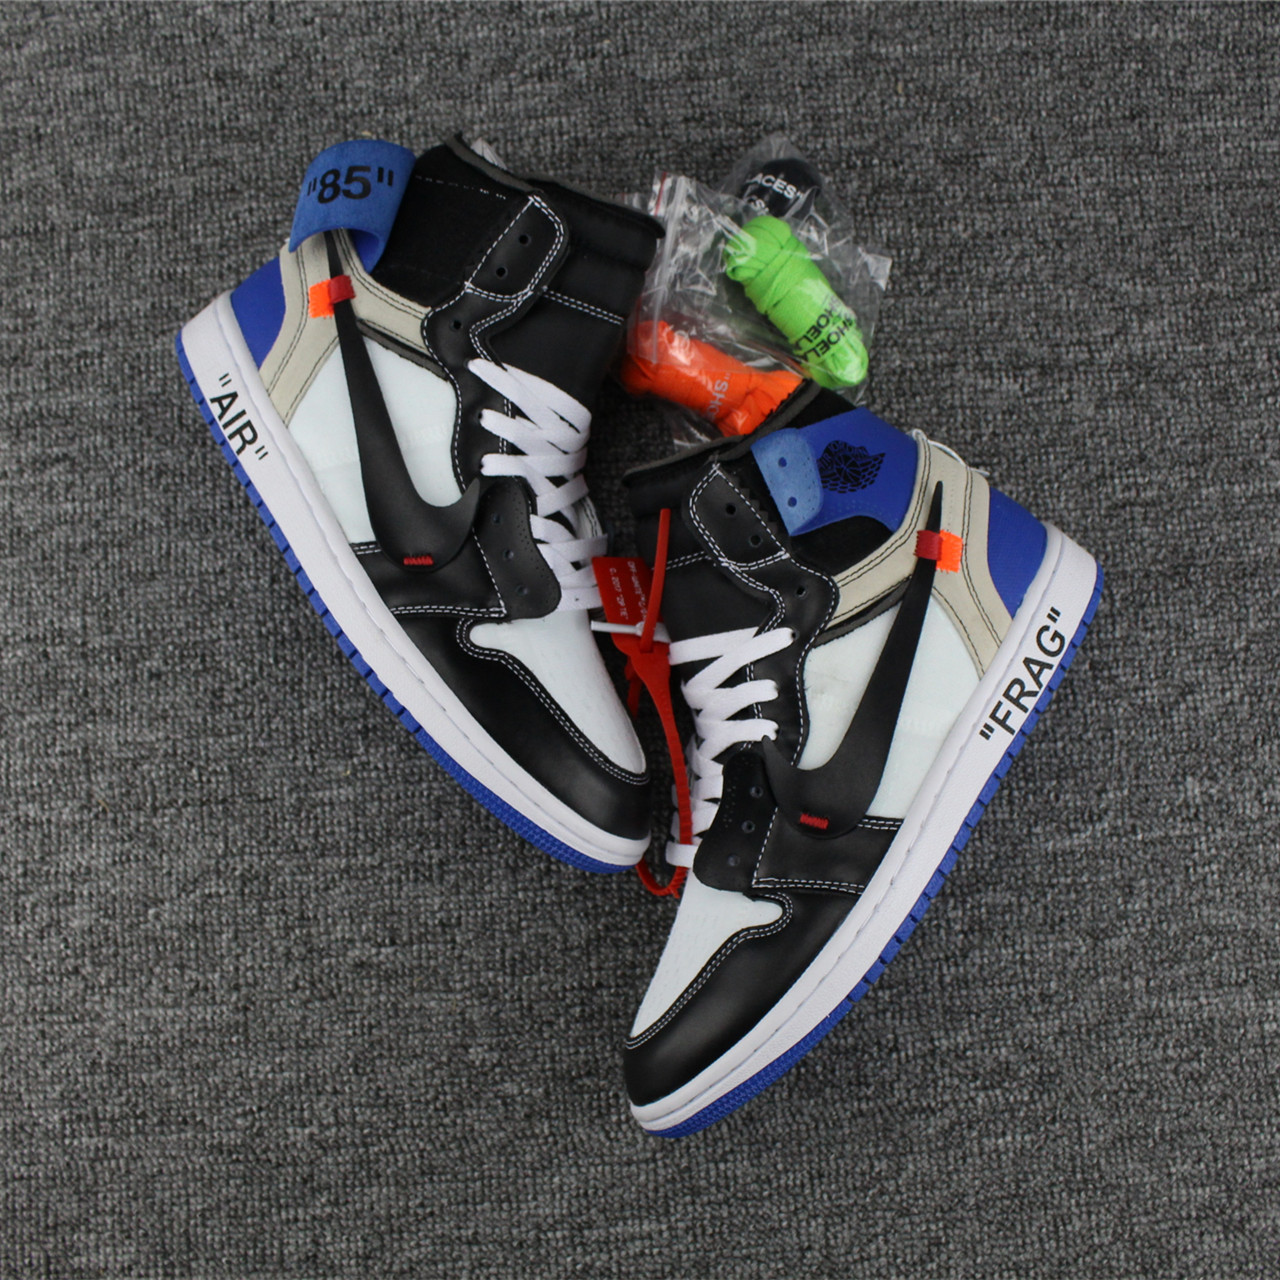 New OFF WHITE Fragment Air Jordan 1 Black White Blue Shoes - Click Image to Close